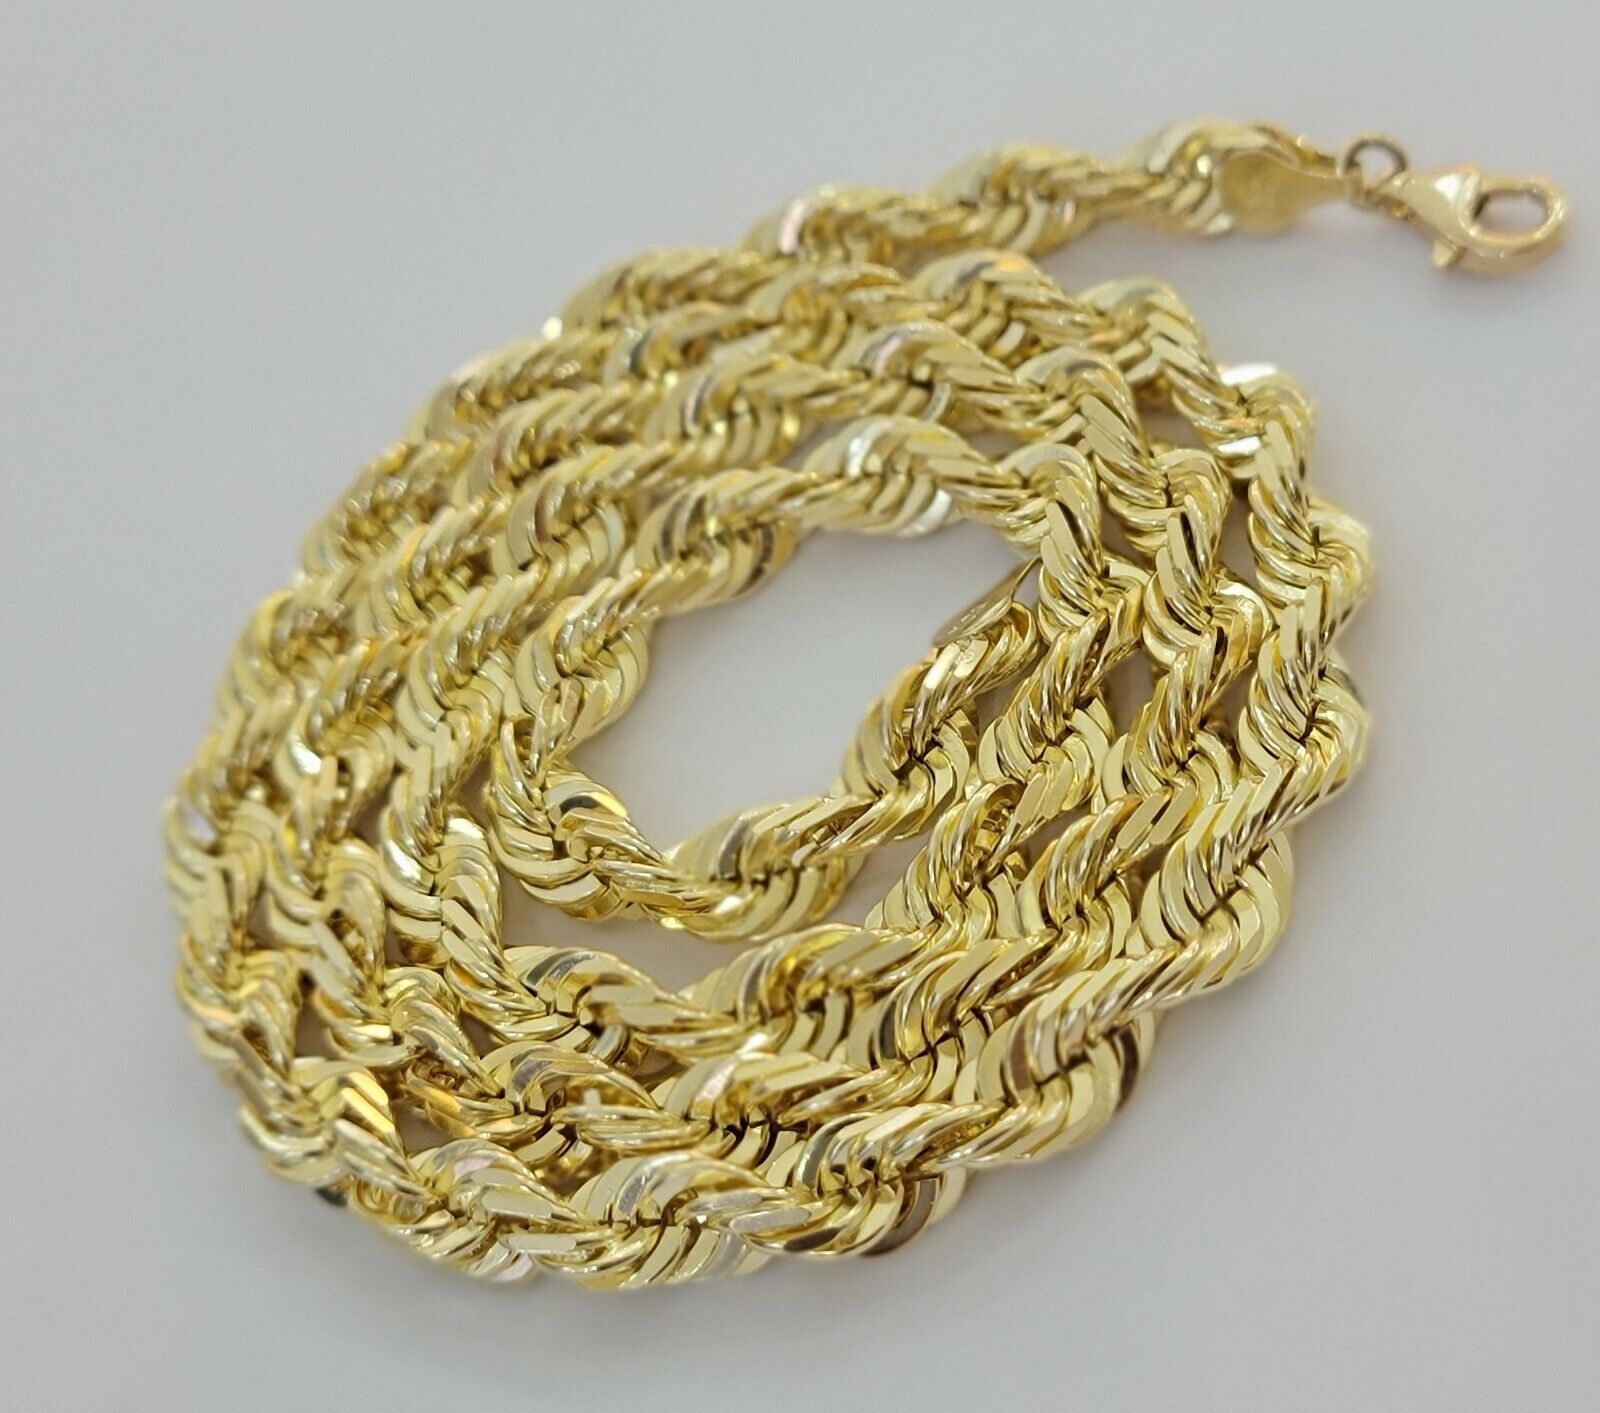 14k Gold Rope Chain 7mm 22 Inch Necklace Diamond Cuts Men's REAL 14 KT  SOLID